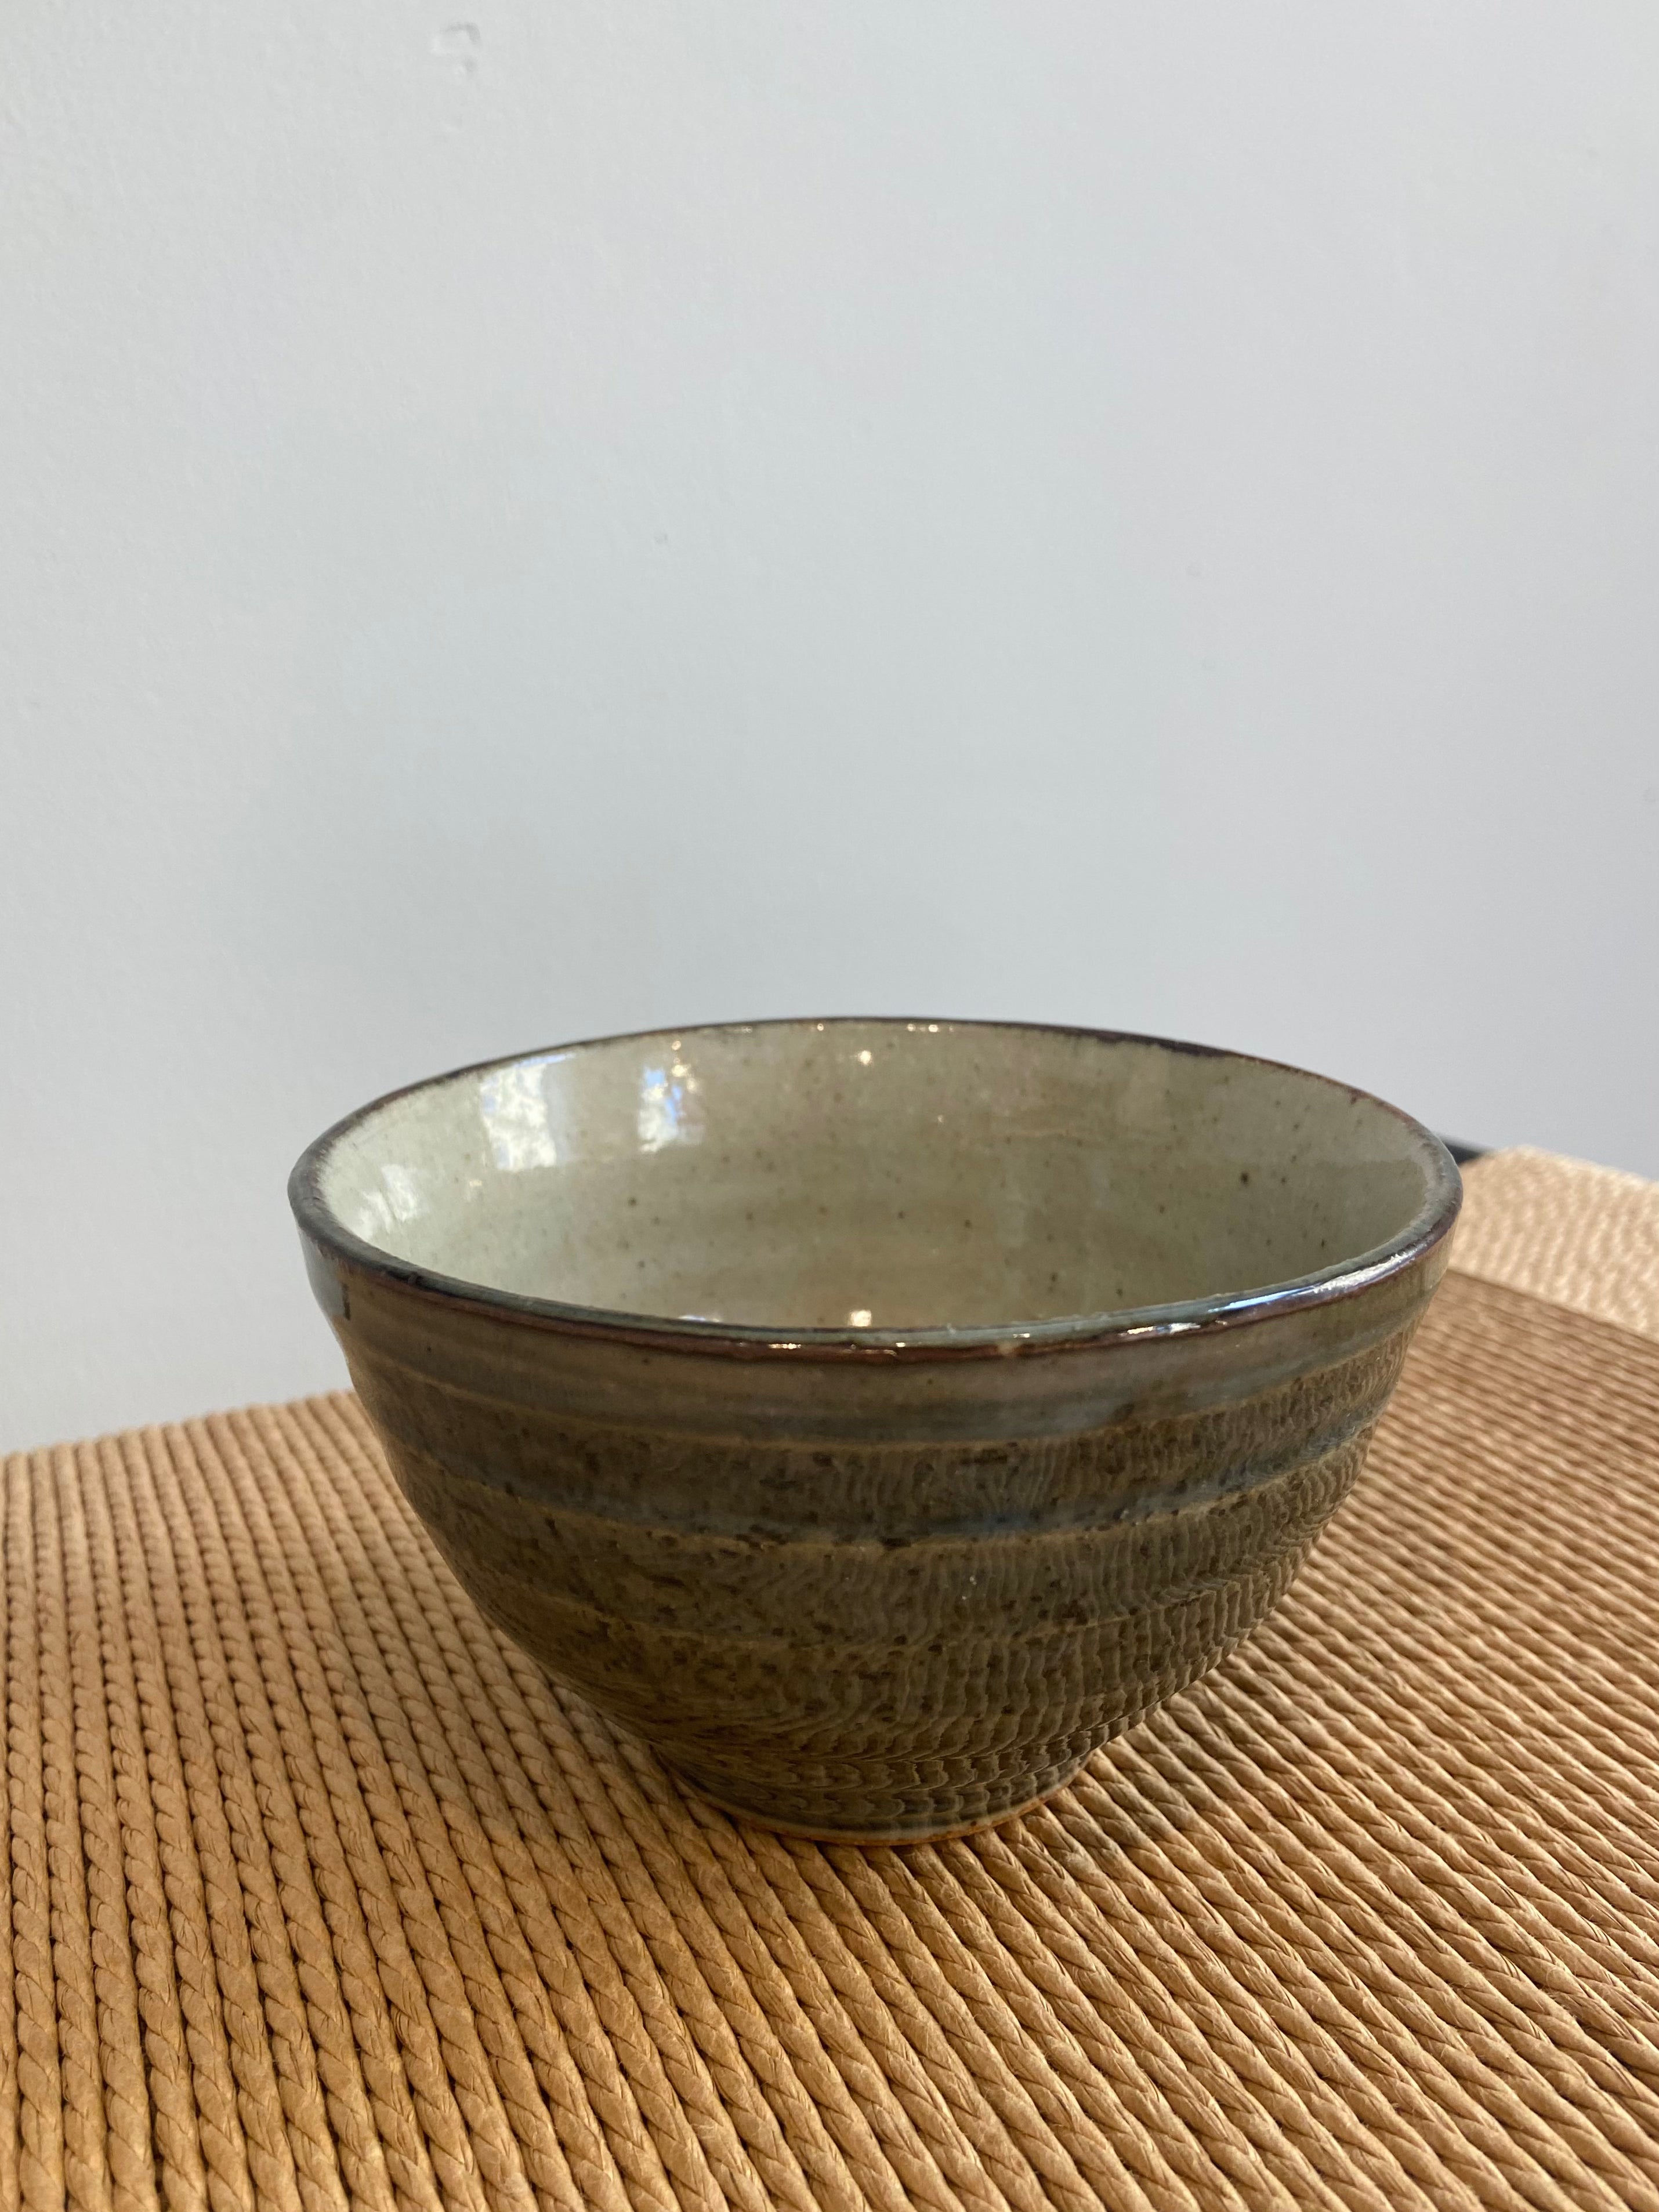 Rustic bowl in brownish shades